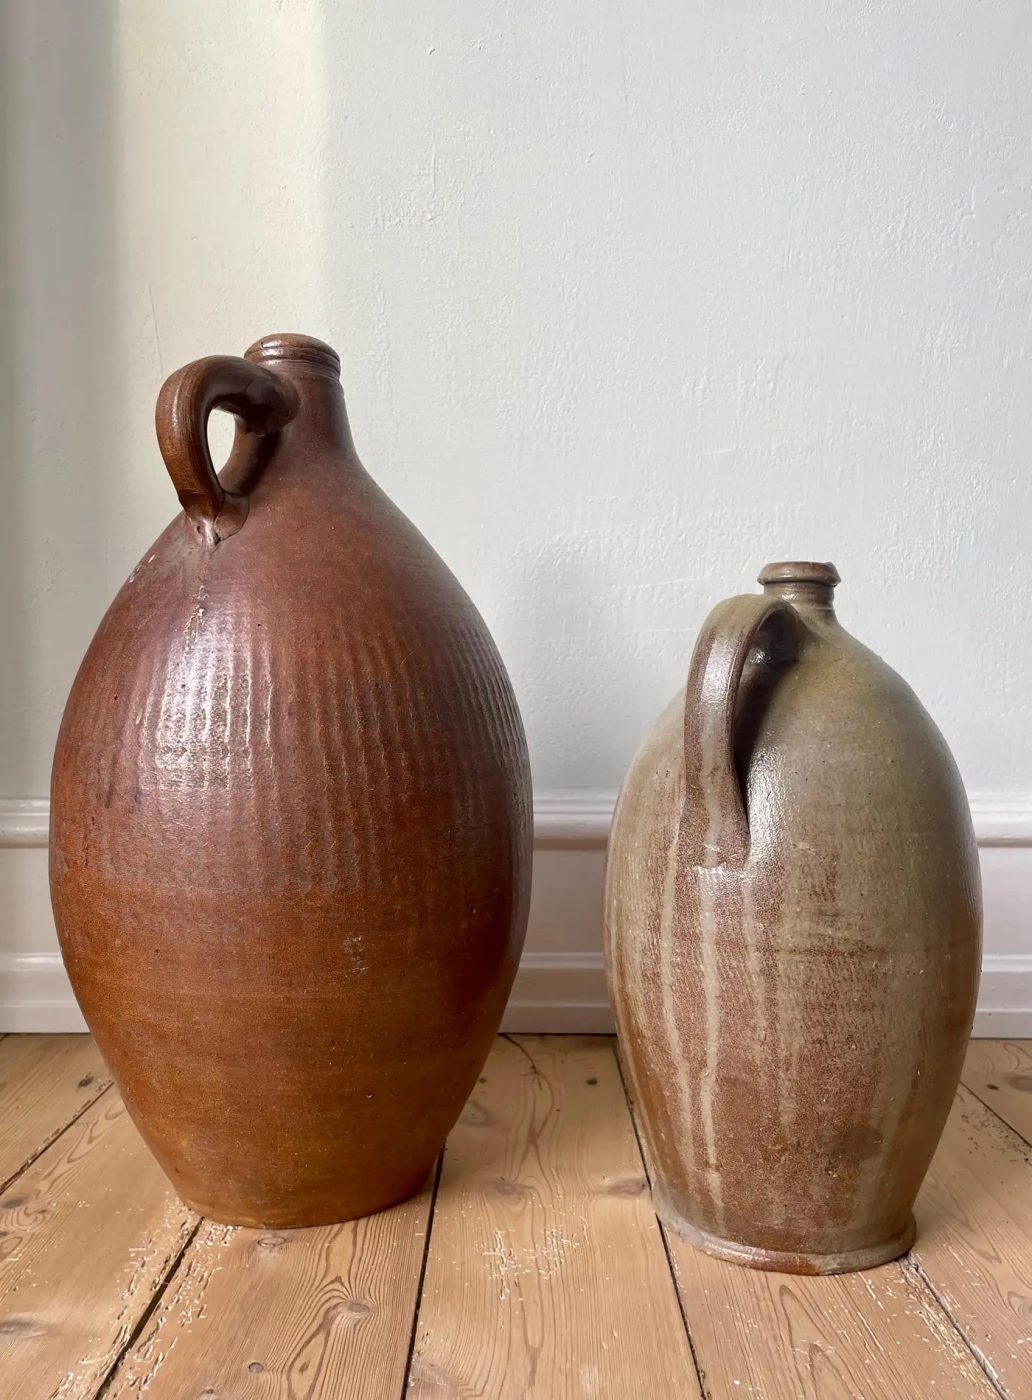 A pair of 19th-century French terracotta jugs in different sizes